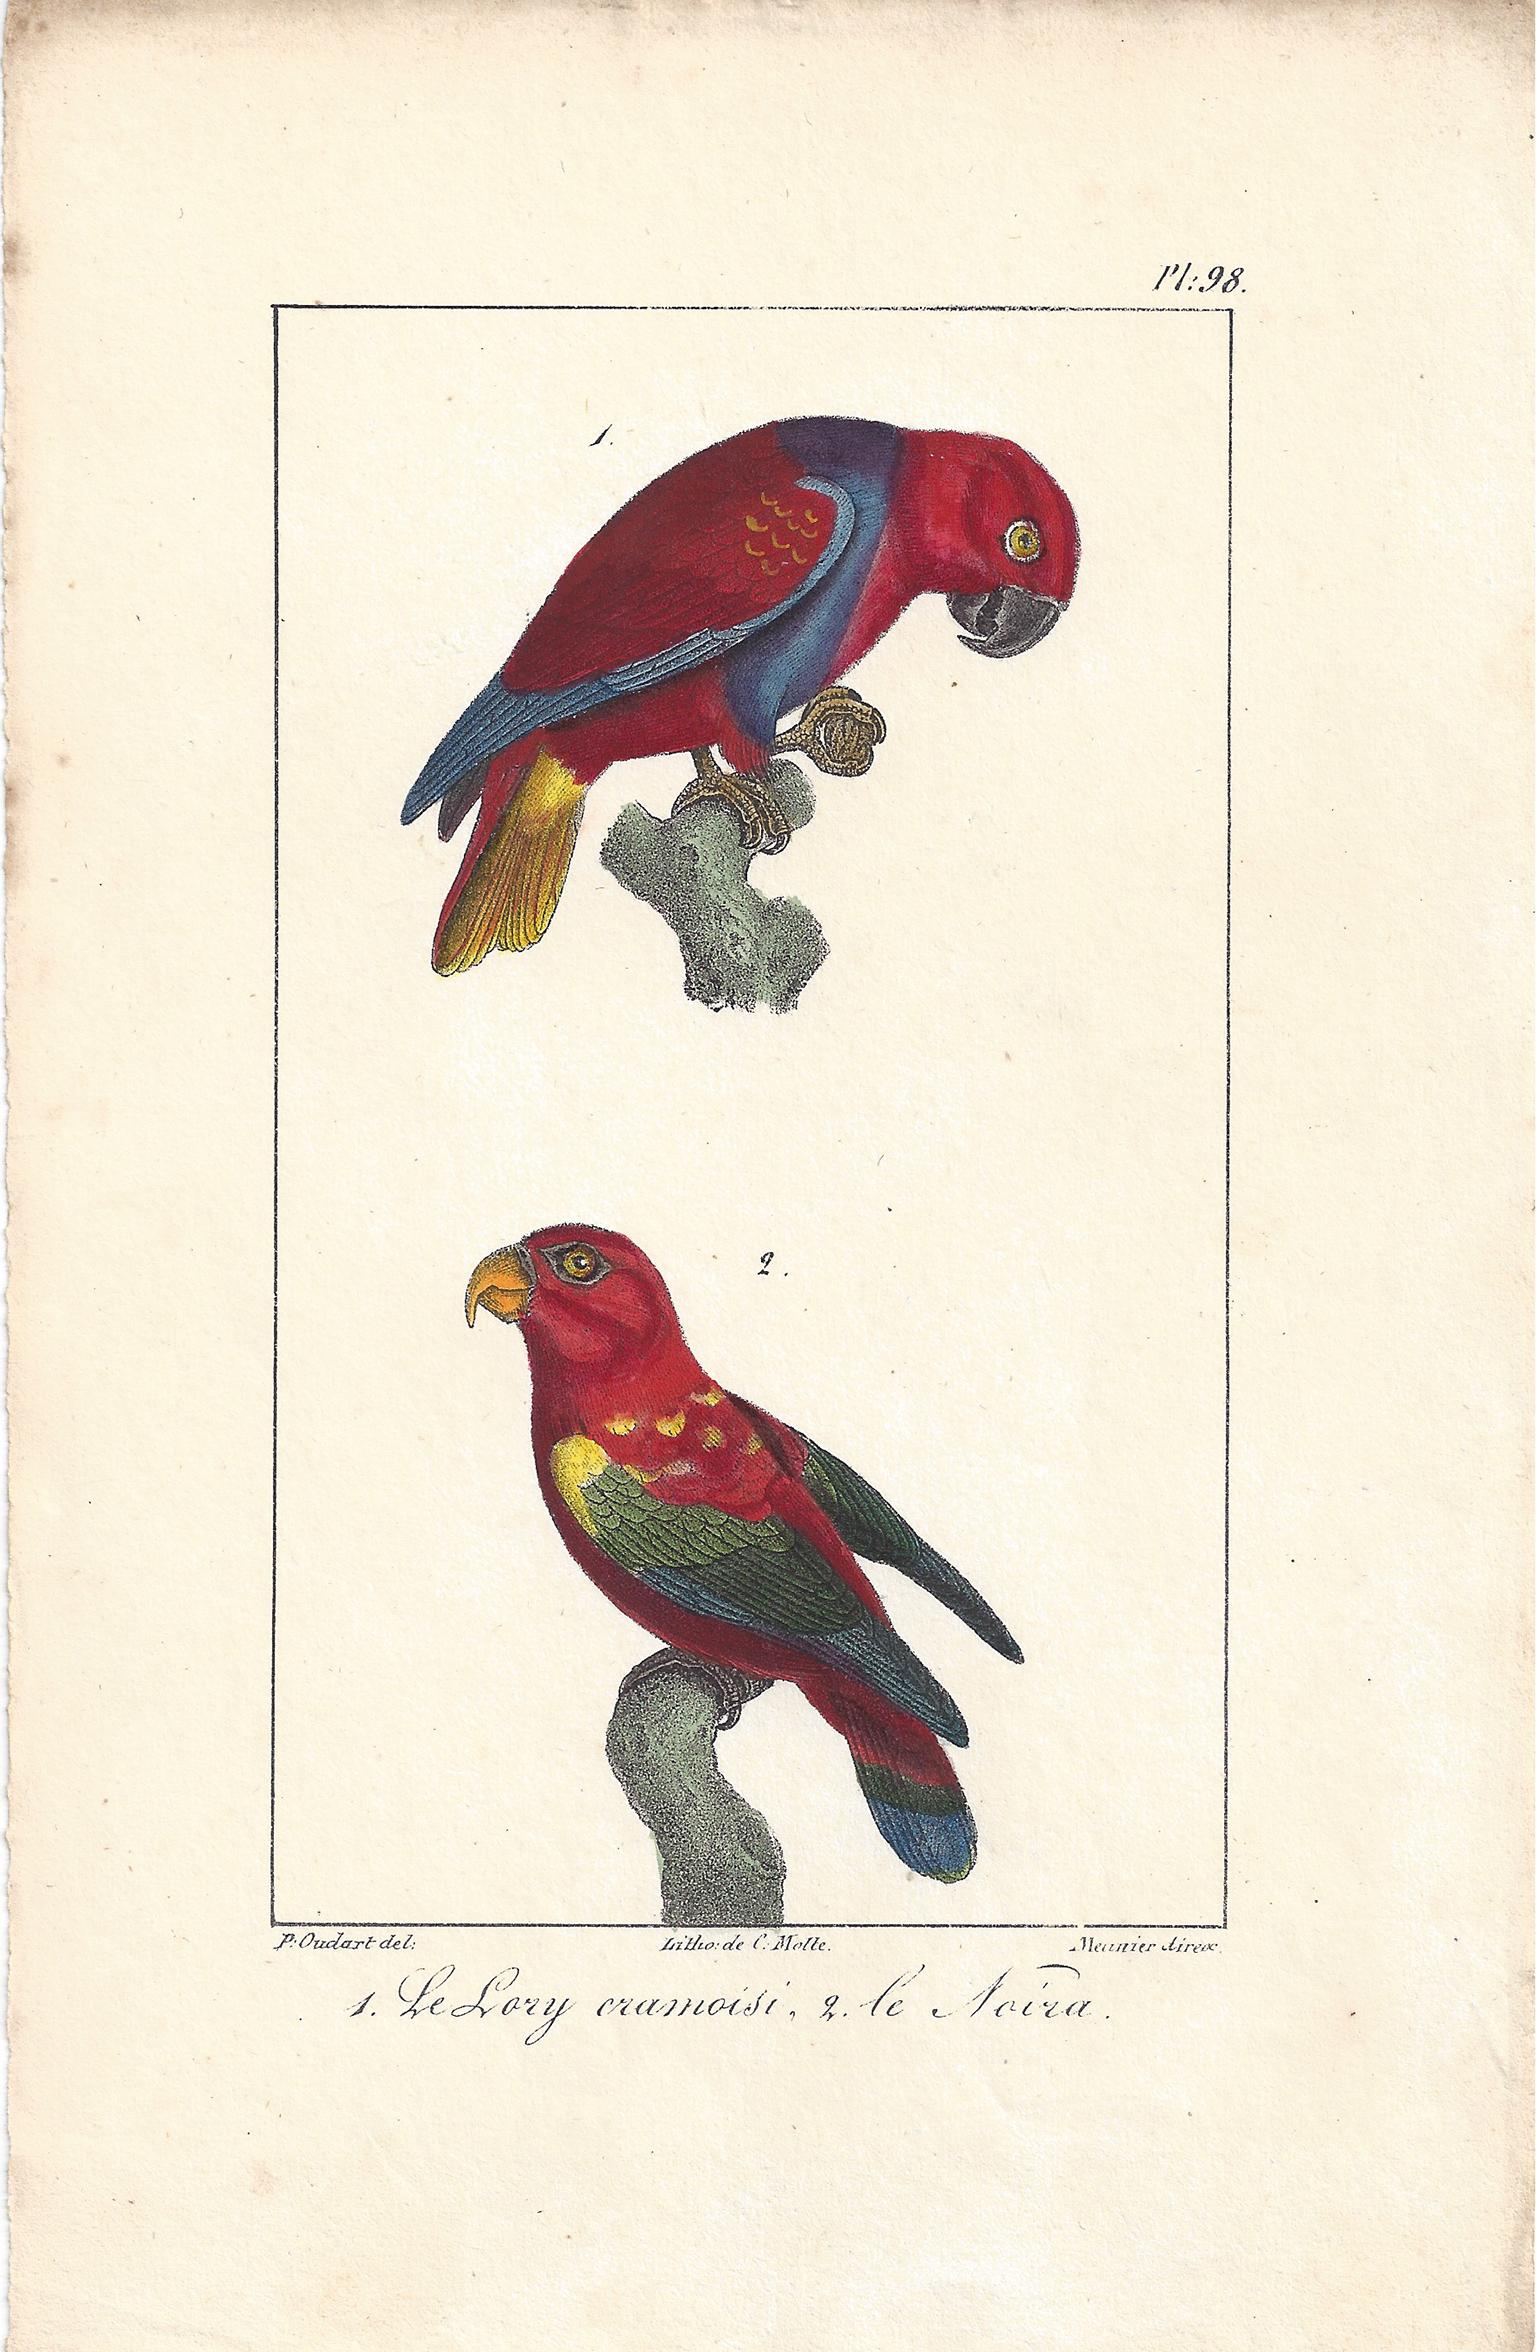 Charles Motte Animal Print - Parrots, French bird lithograph print, 1832